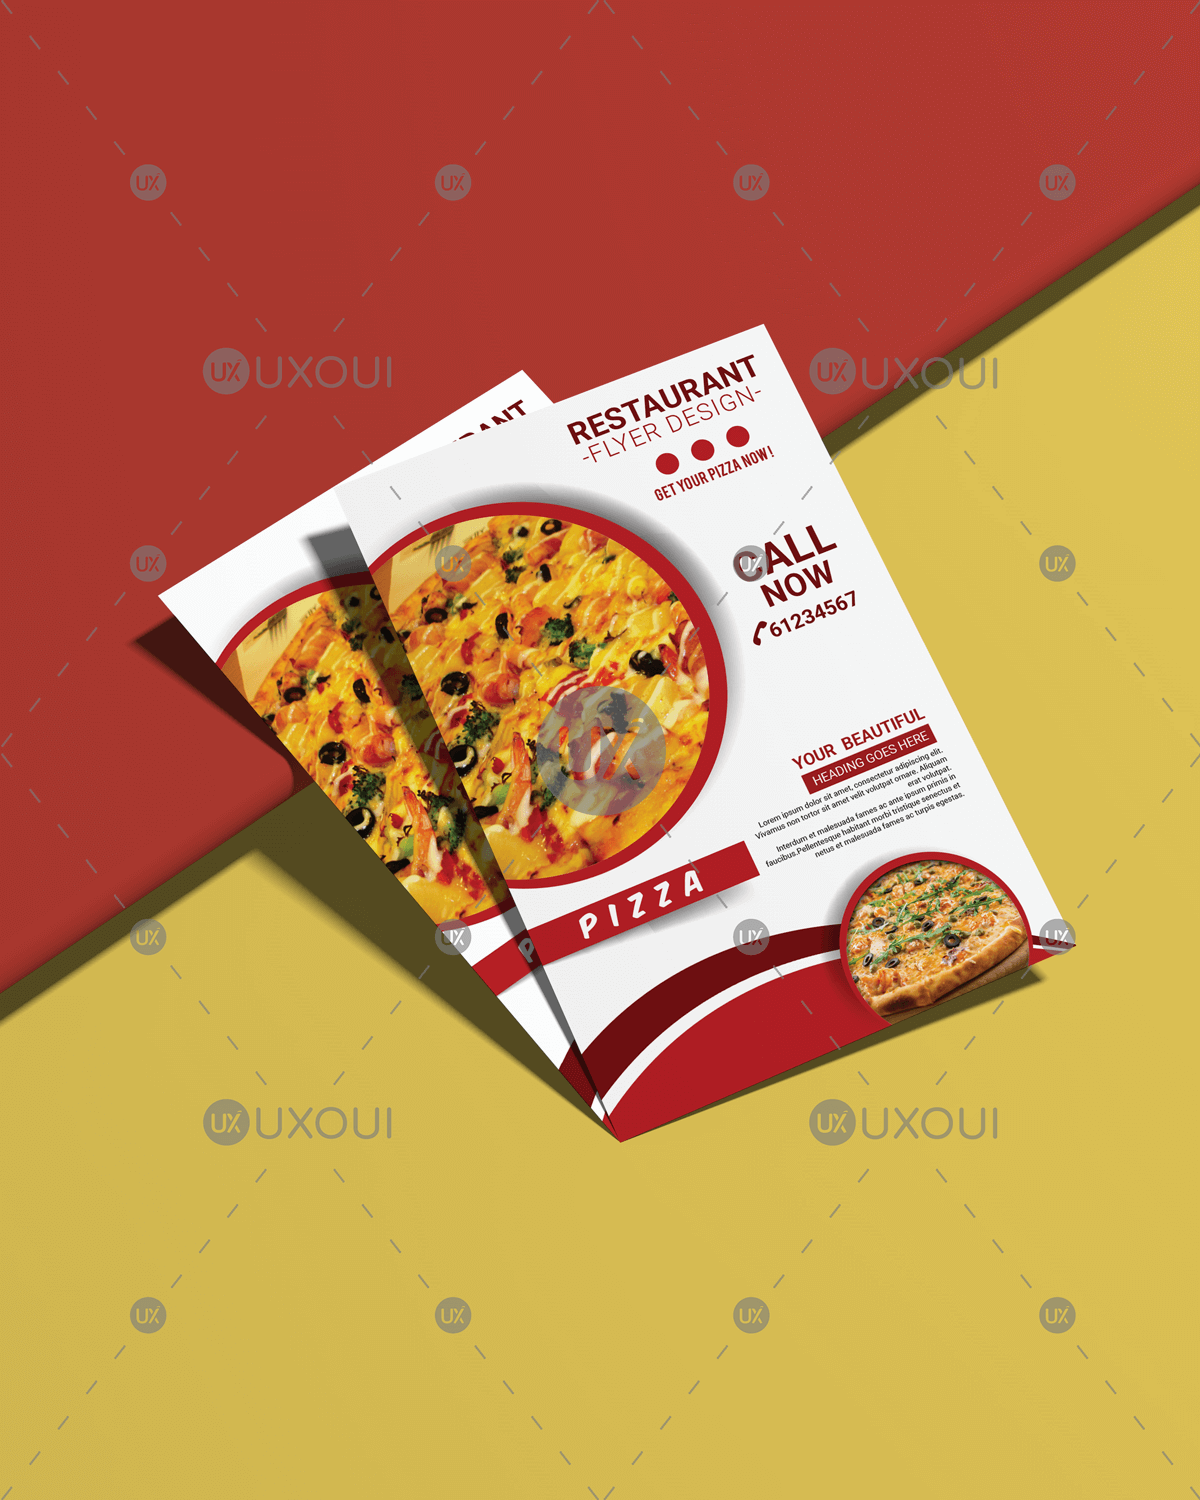 Modern Pizza Restaurant Flyer Template With Red Abstract Design Uxoui